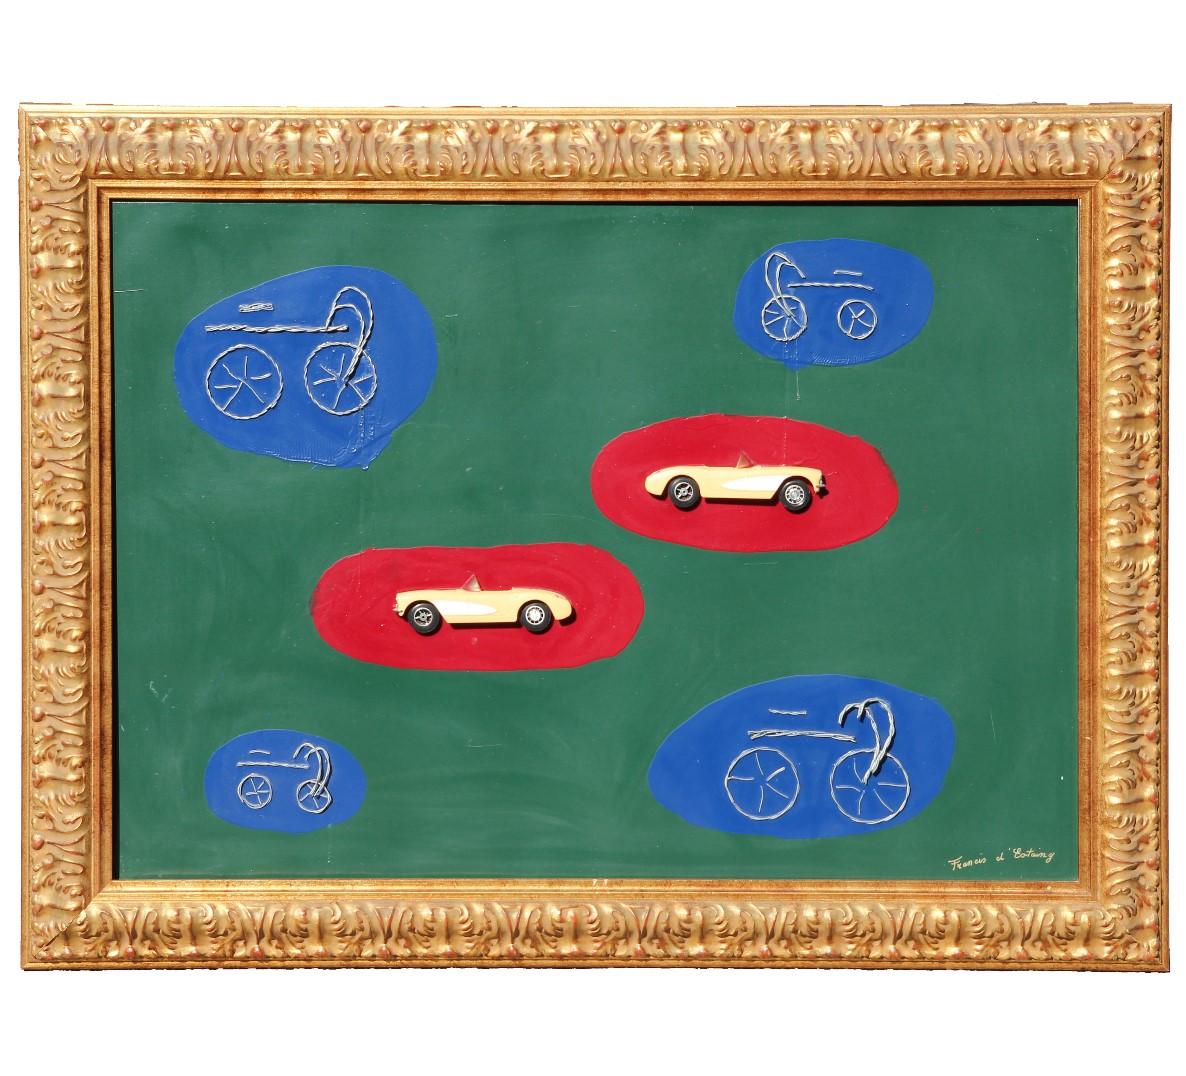 Large Mixed Media Minimal Abstract with Toy Cars - Mixed Media Art by Francis d'Estaing